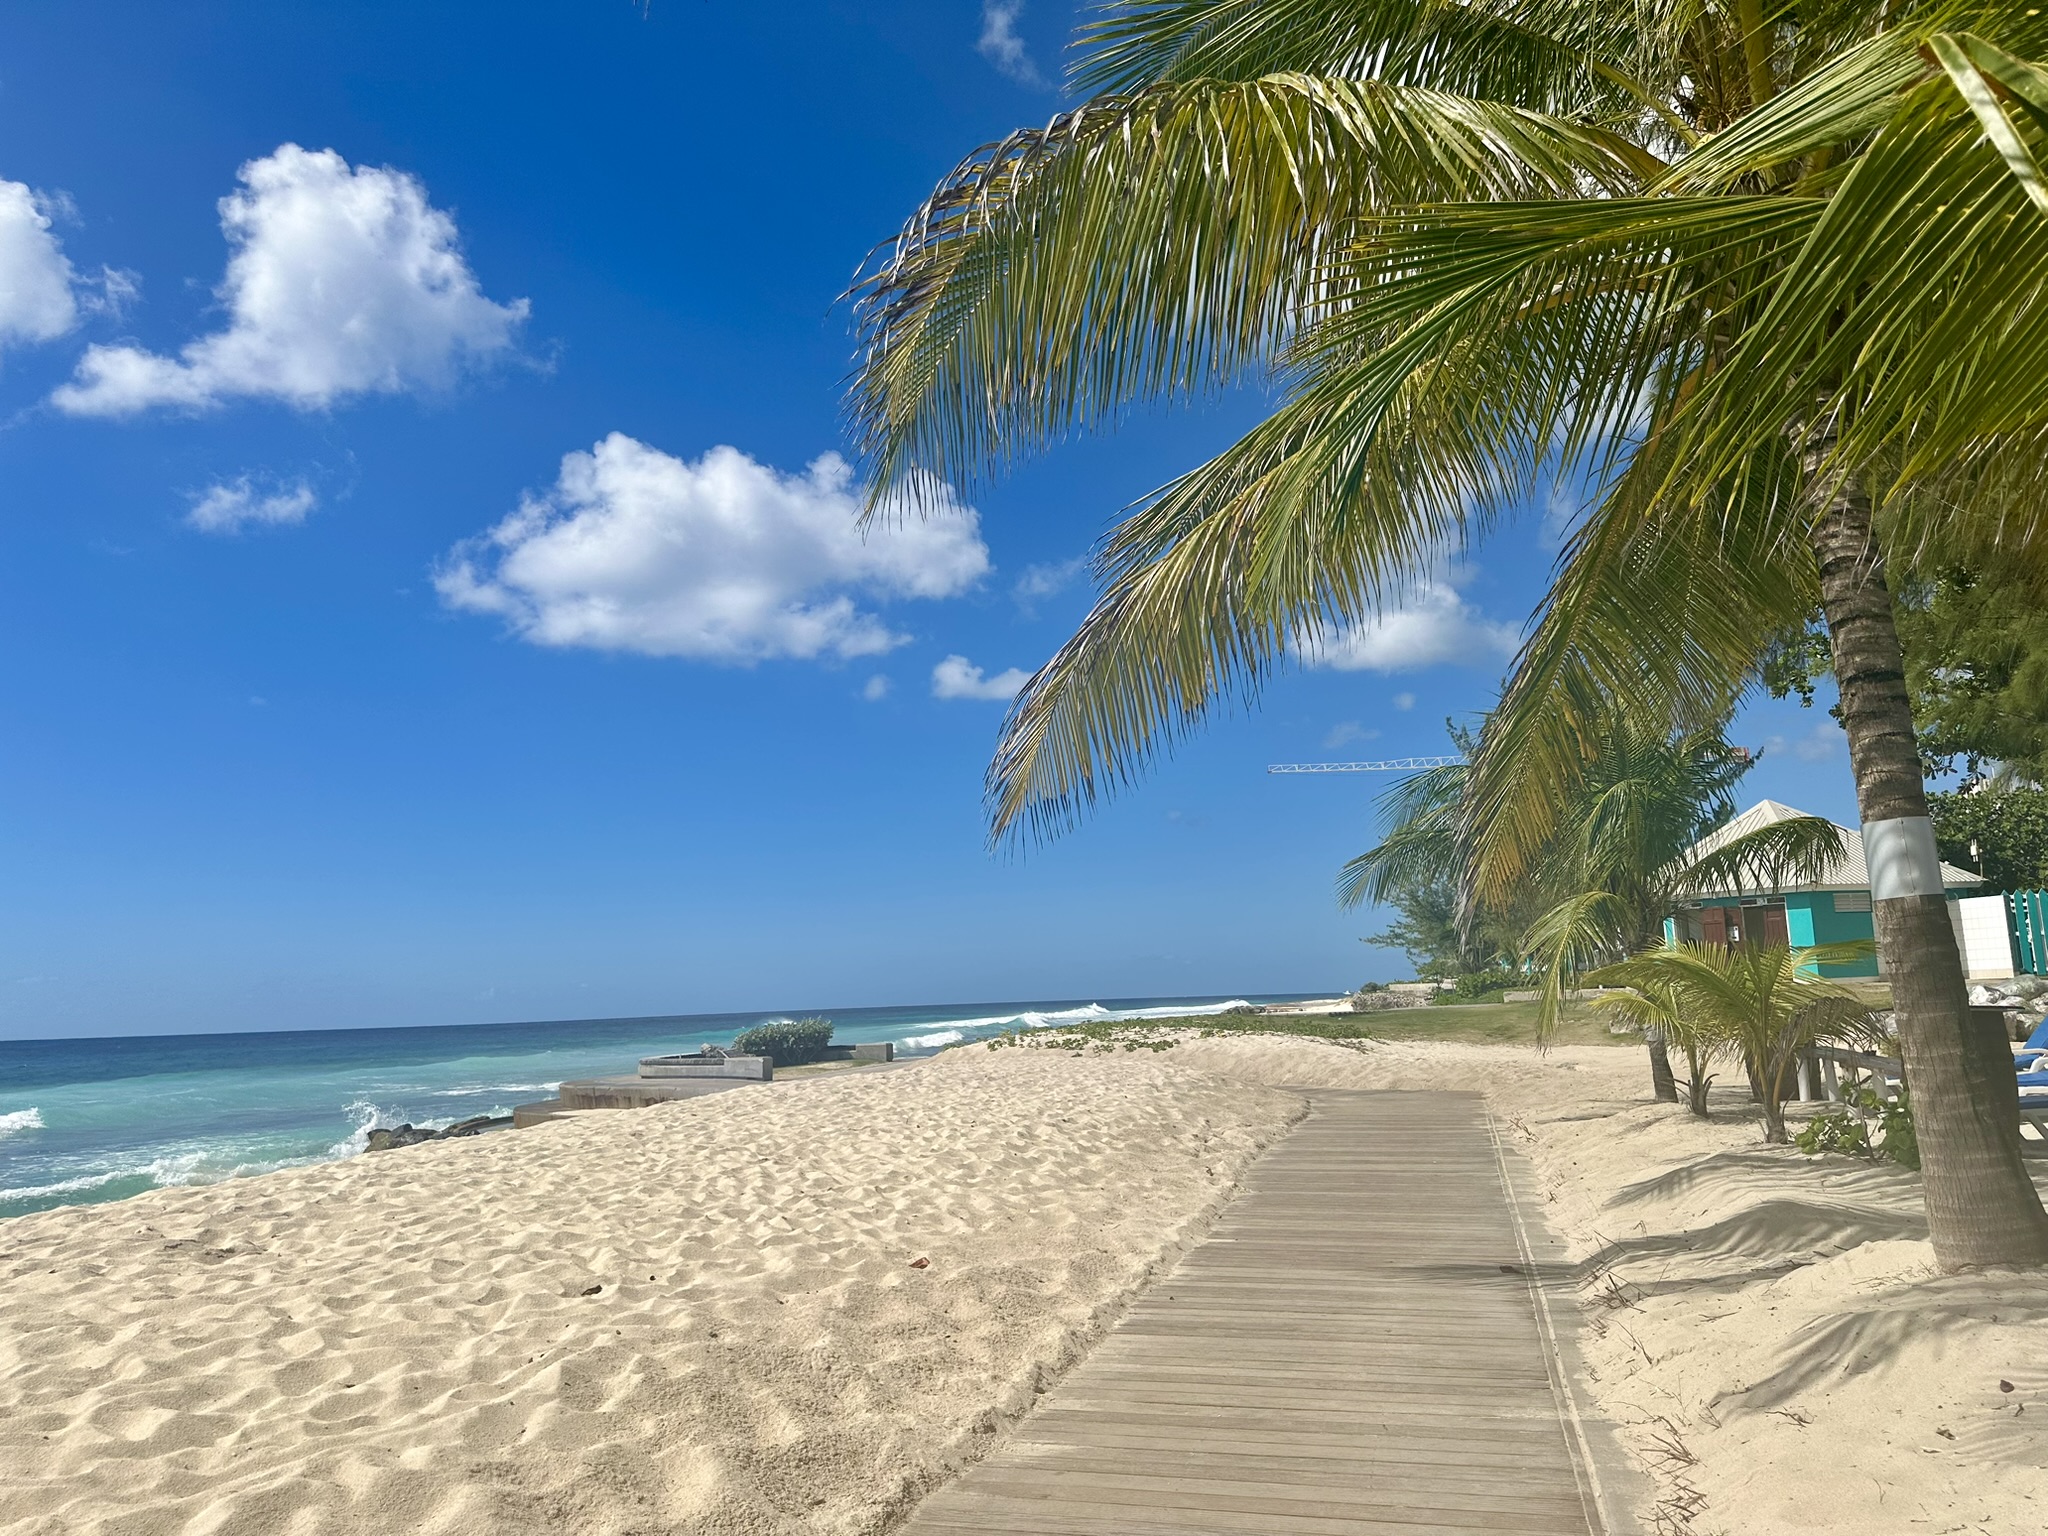 A boardwalk across a sandy beach in Barbados flanked by blue water and palm trees.